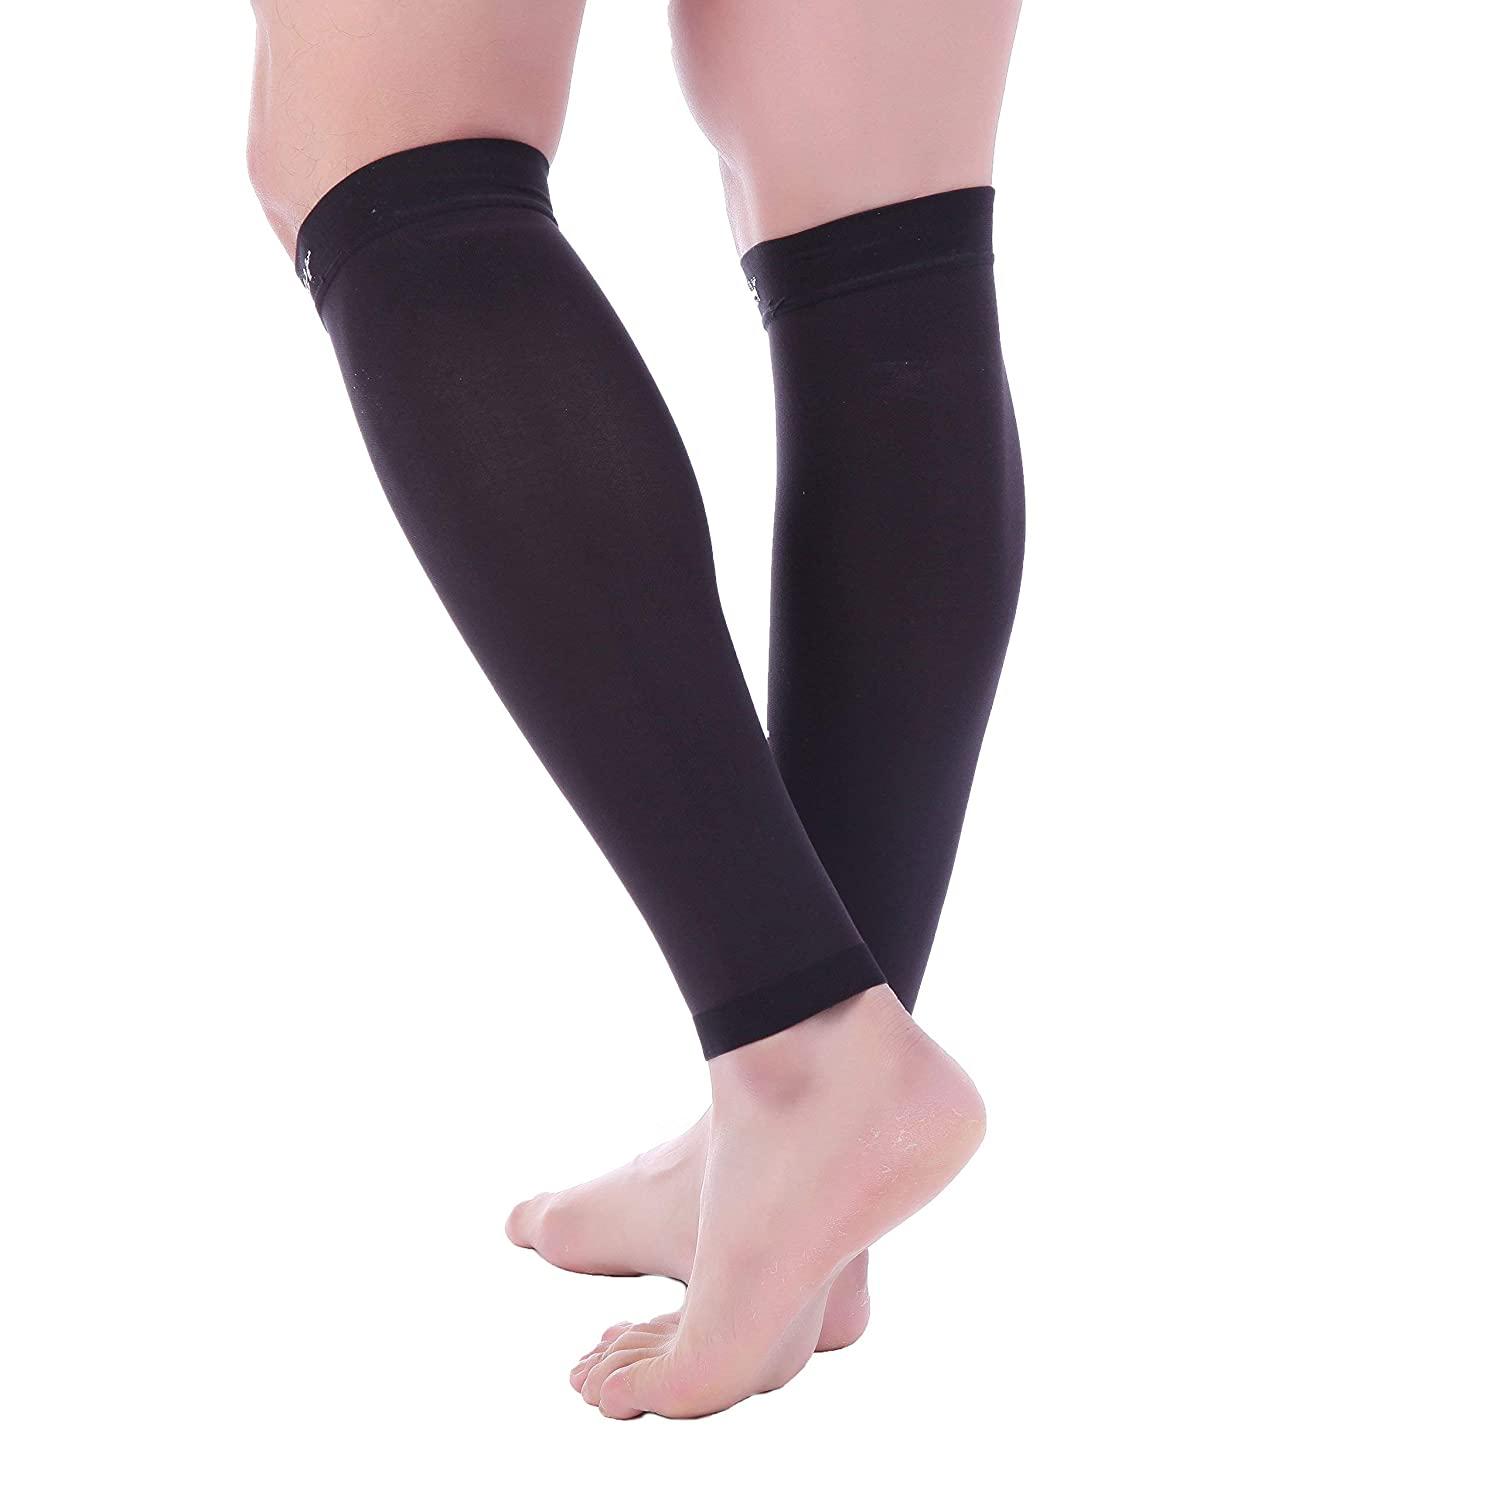 Doc Miller Petite Calf Compression Sleeve for Short People Men and